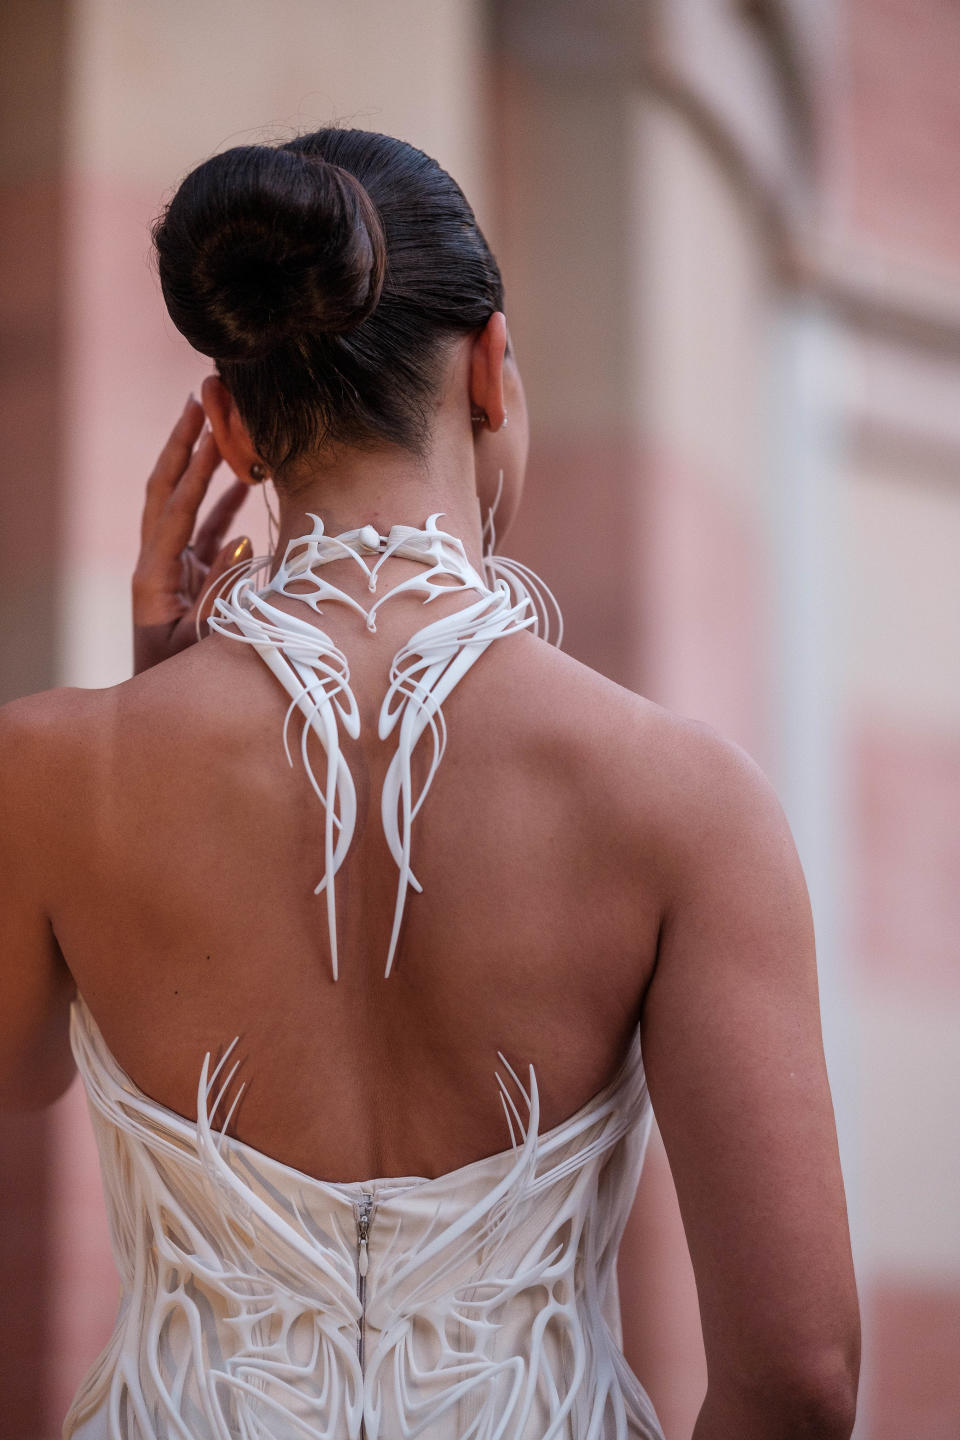 The 3D-printed elements extend beyond the bodice of the gown.